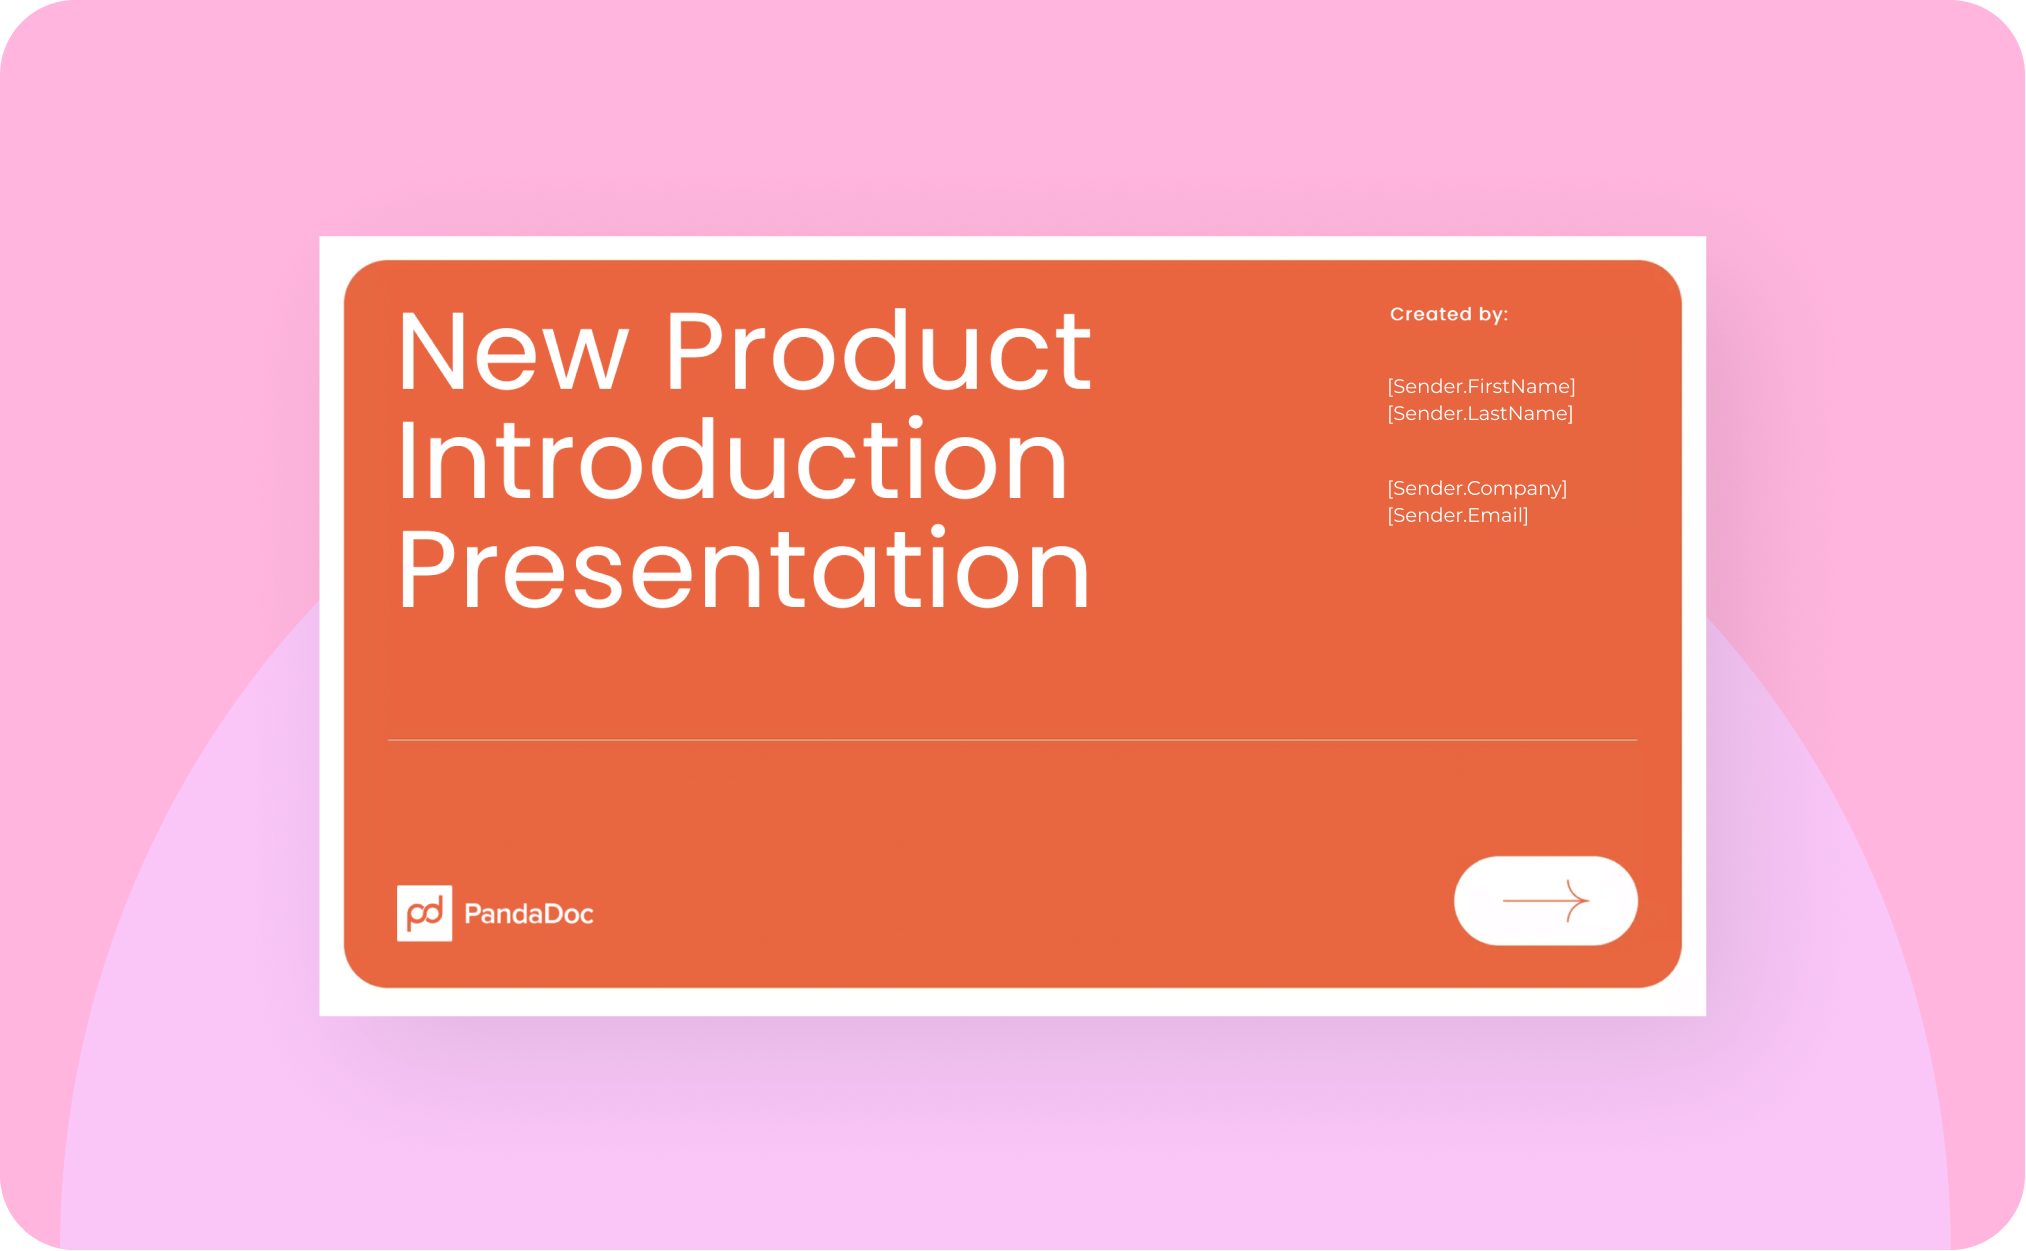 New Product Introduction Presentation